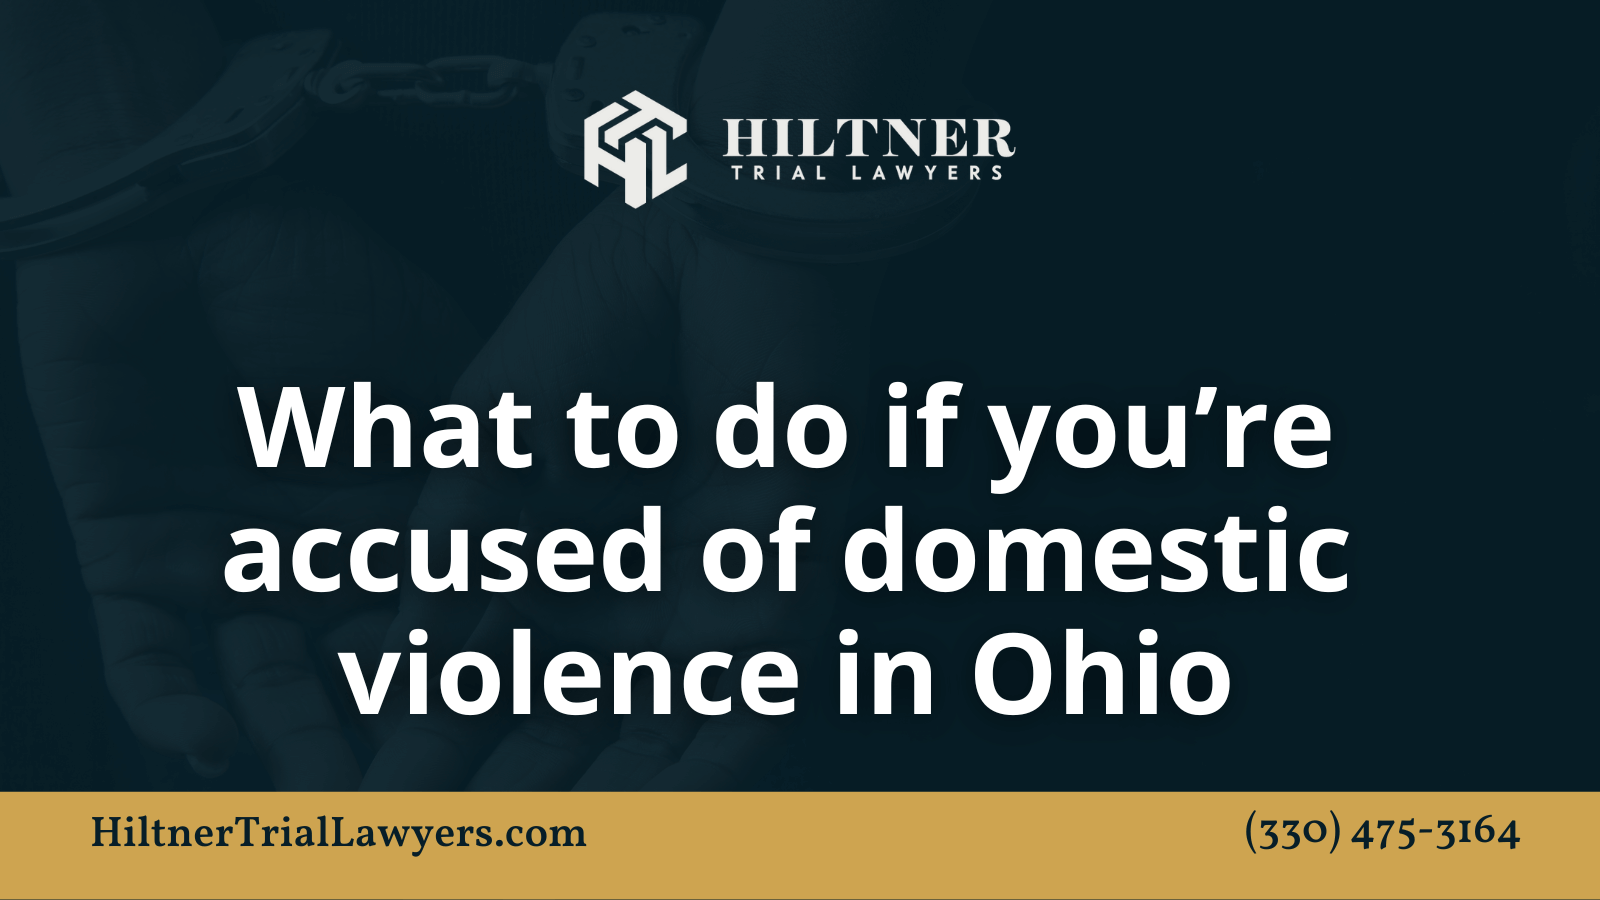 What to do if you’re accused of domestic violence in Ohio - Hiltner Trial Lawyers Ohio - max hiltner